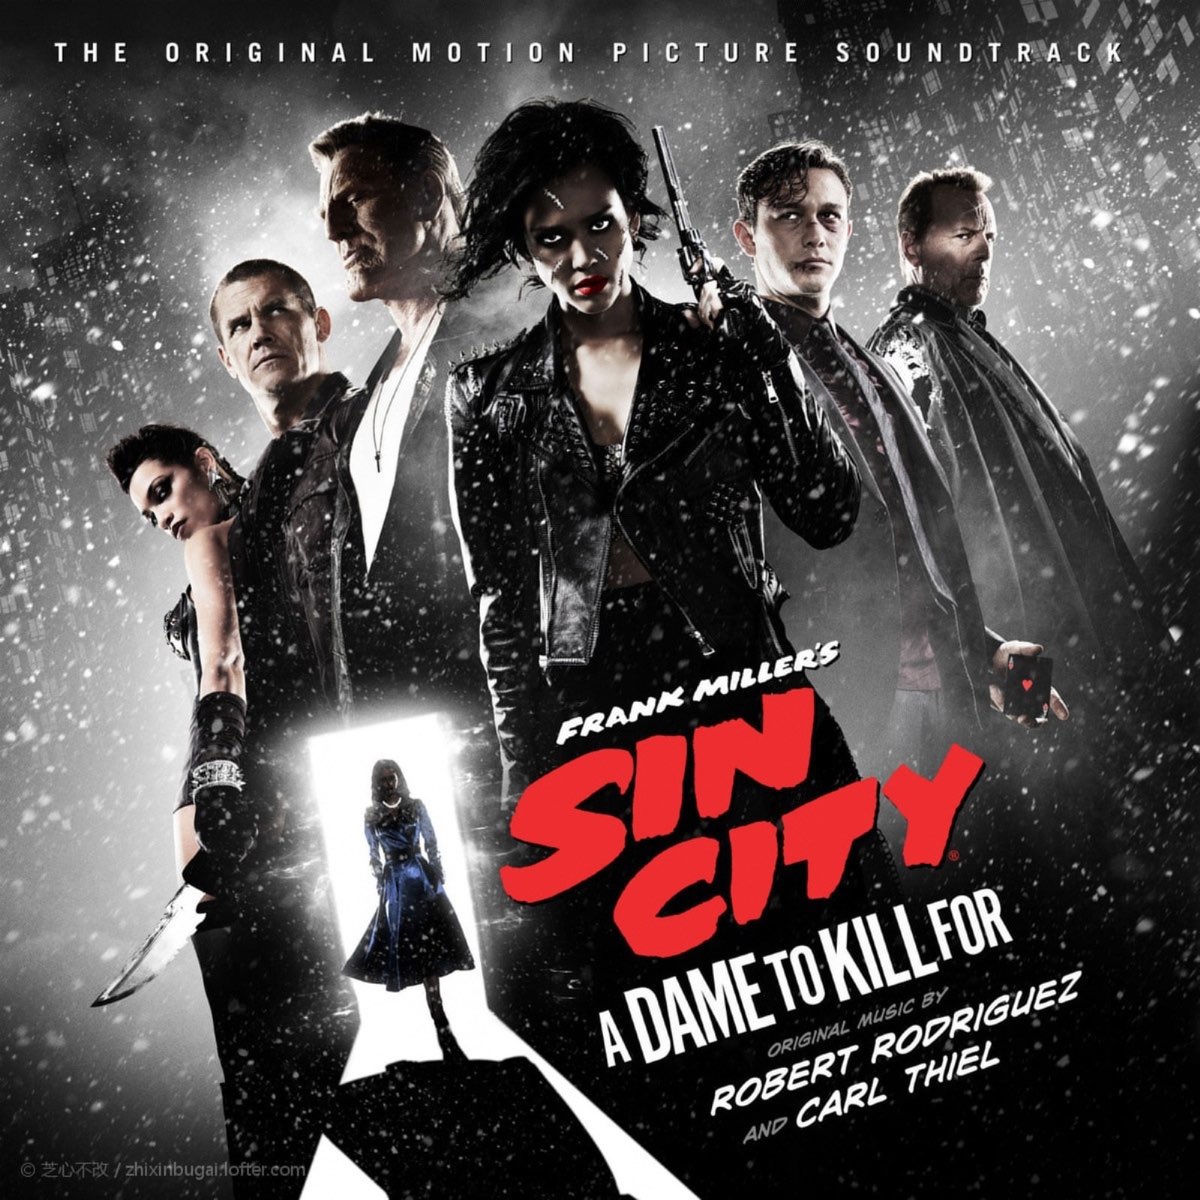 Sin City 2: A Dame to Kill for (Original Motion Picture Soundtrack) by  Robert Rodriguez & Carl Thiel on Apple Music